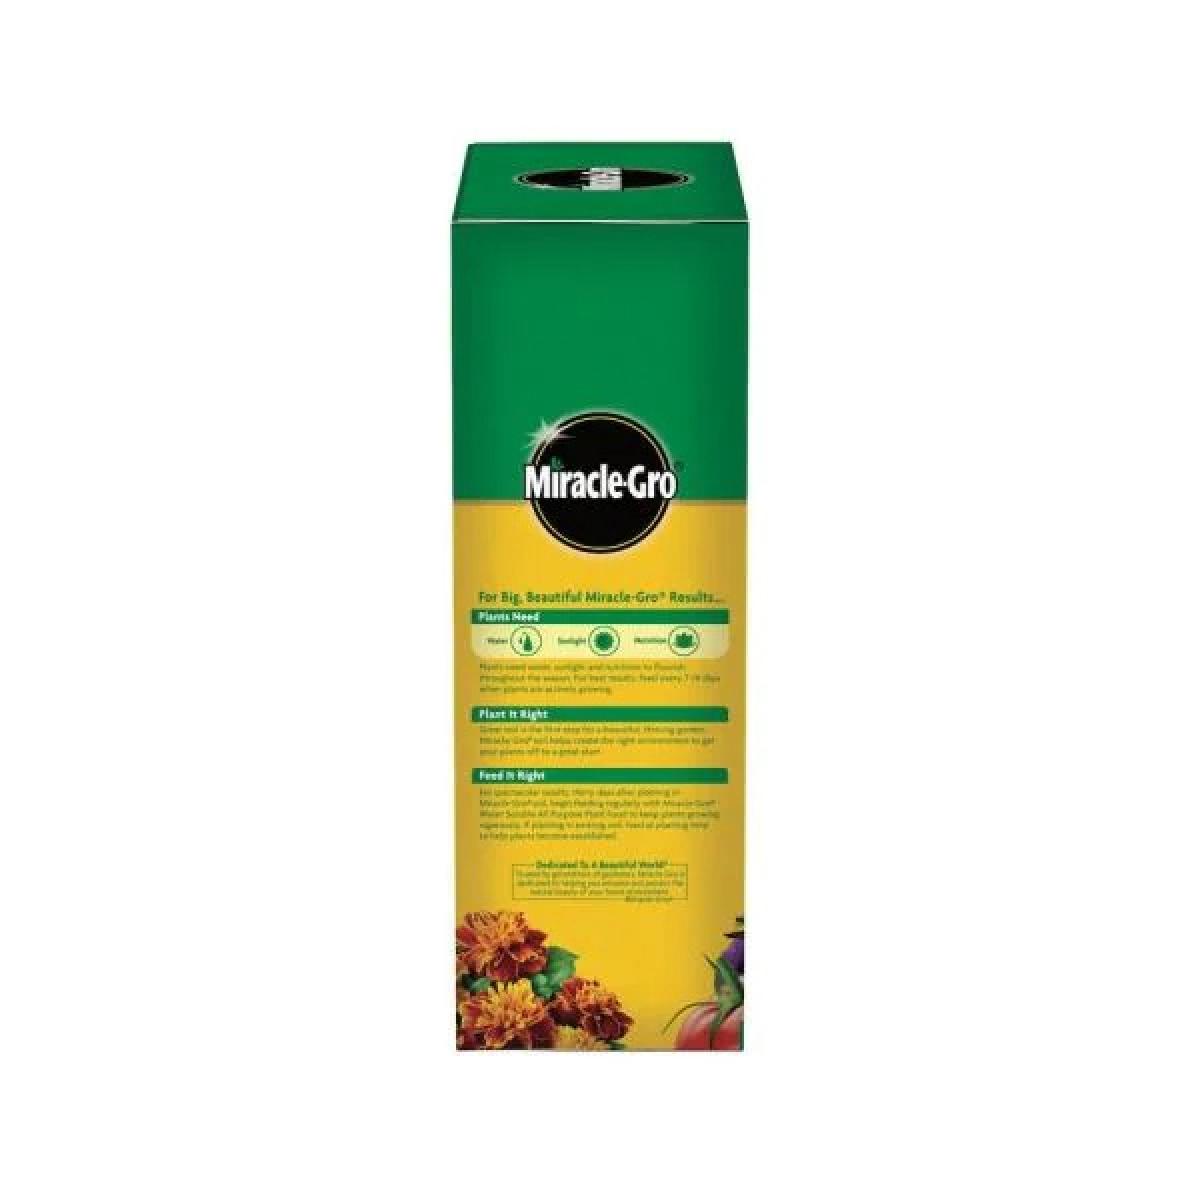 Miracle-Gro Water Soluble All Purpose Plant Food